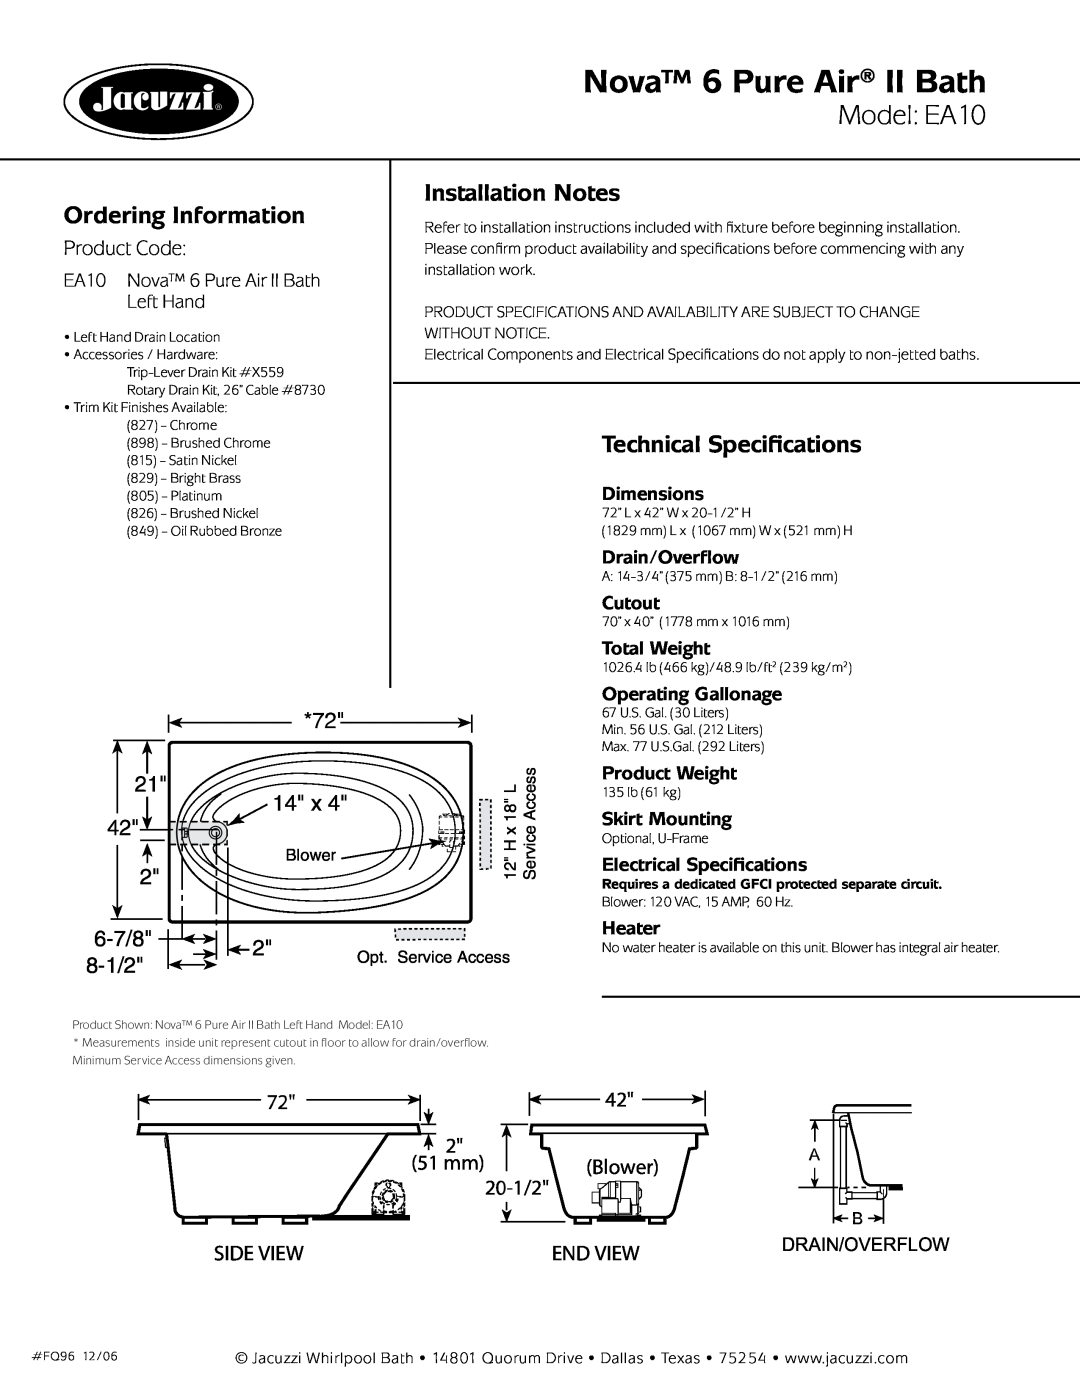 Jacuzzi FQ96 Nova 6 Pure Air II Bath, Model EA10, Ordering Information, Installation Notes, Technical Specifications 